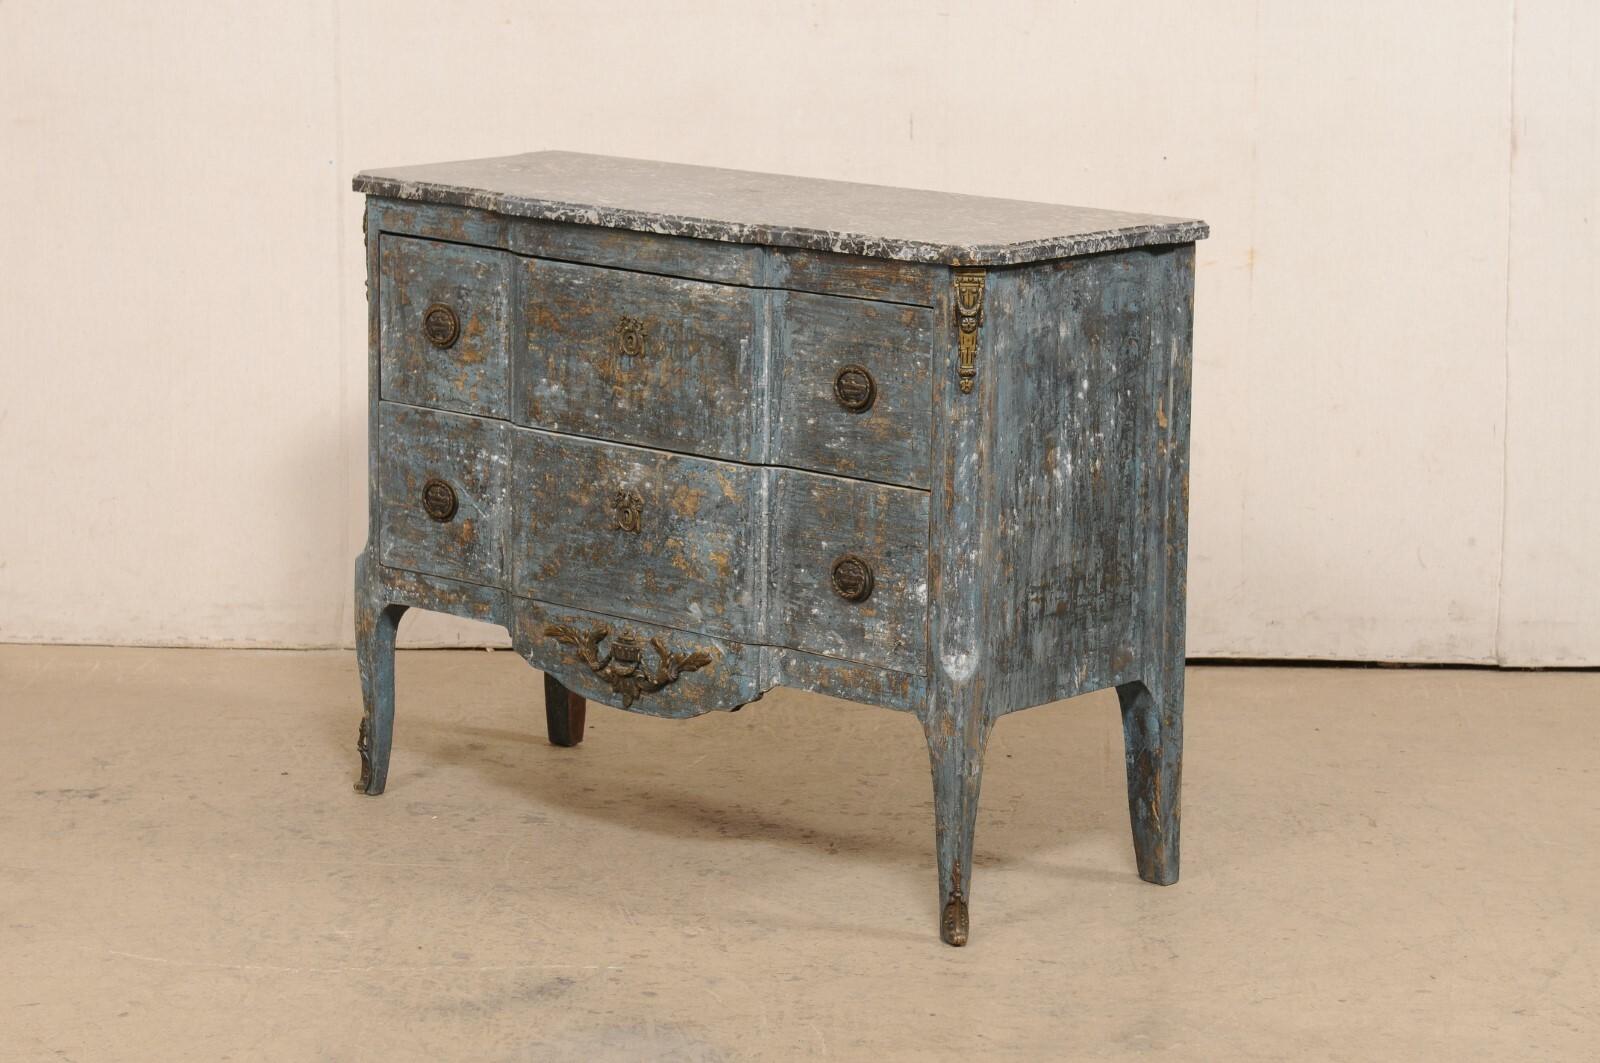 Antique French Neoclassical Style Commode w/Black Marble Top & Scraped Finish For Sale 6